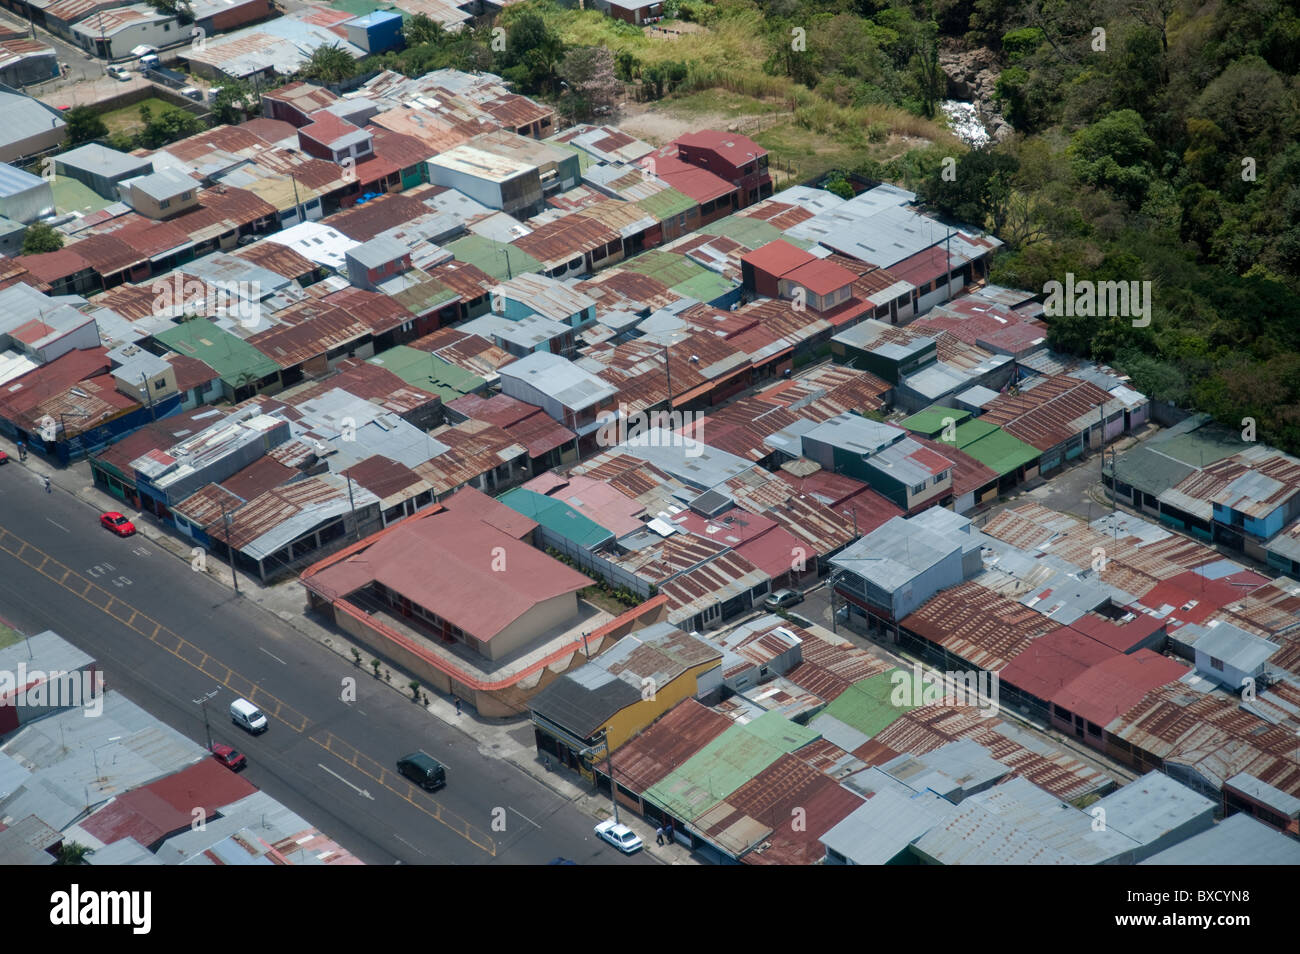 Aeriel view of corrugated metal roofs in San Jose Stock Photo